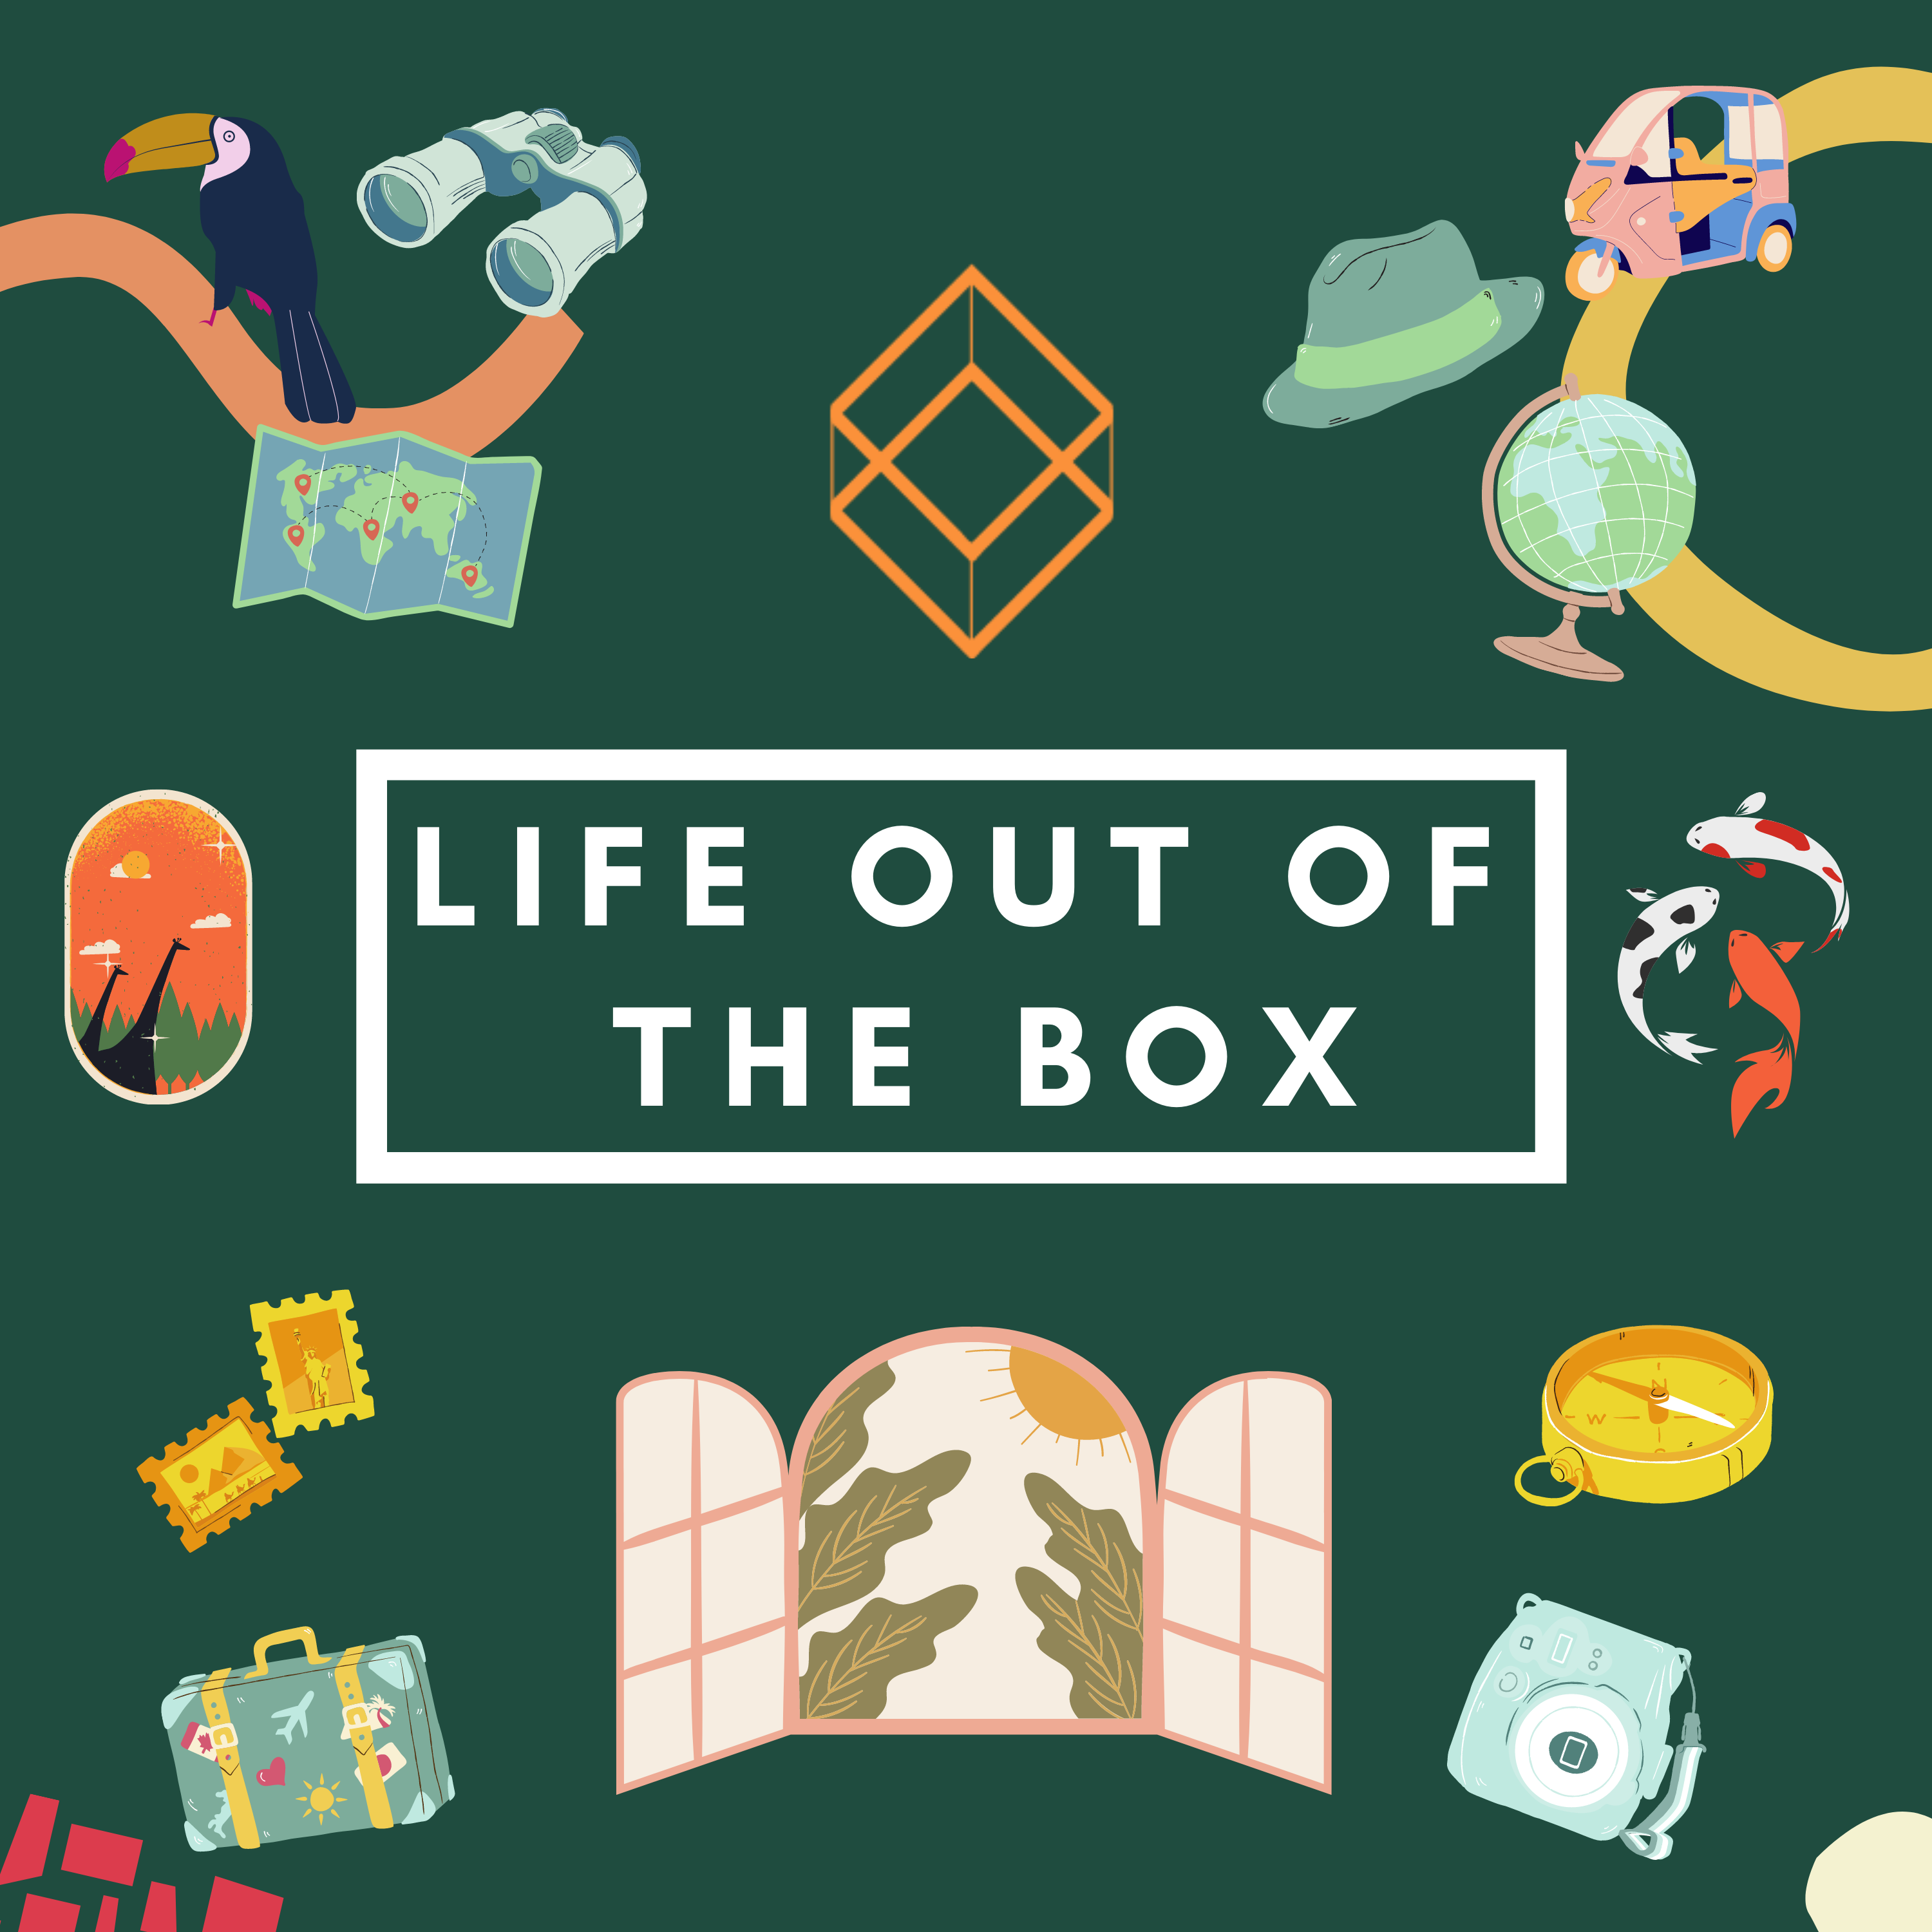 Life Out of the Box